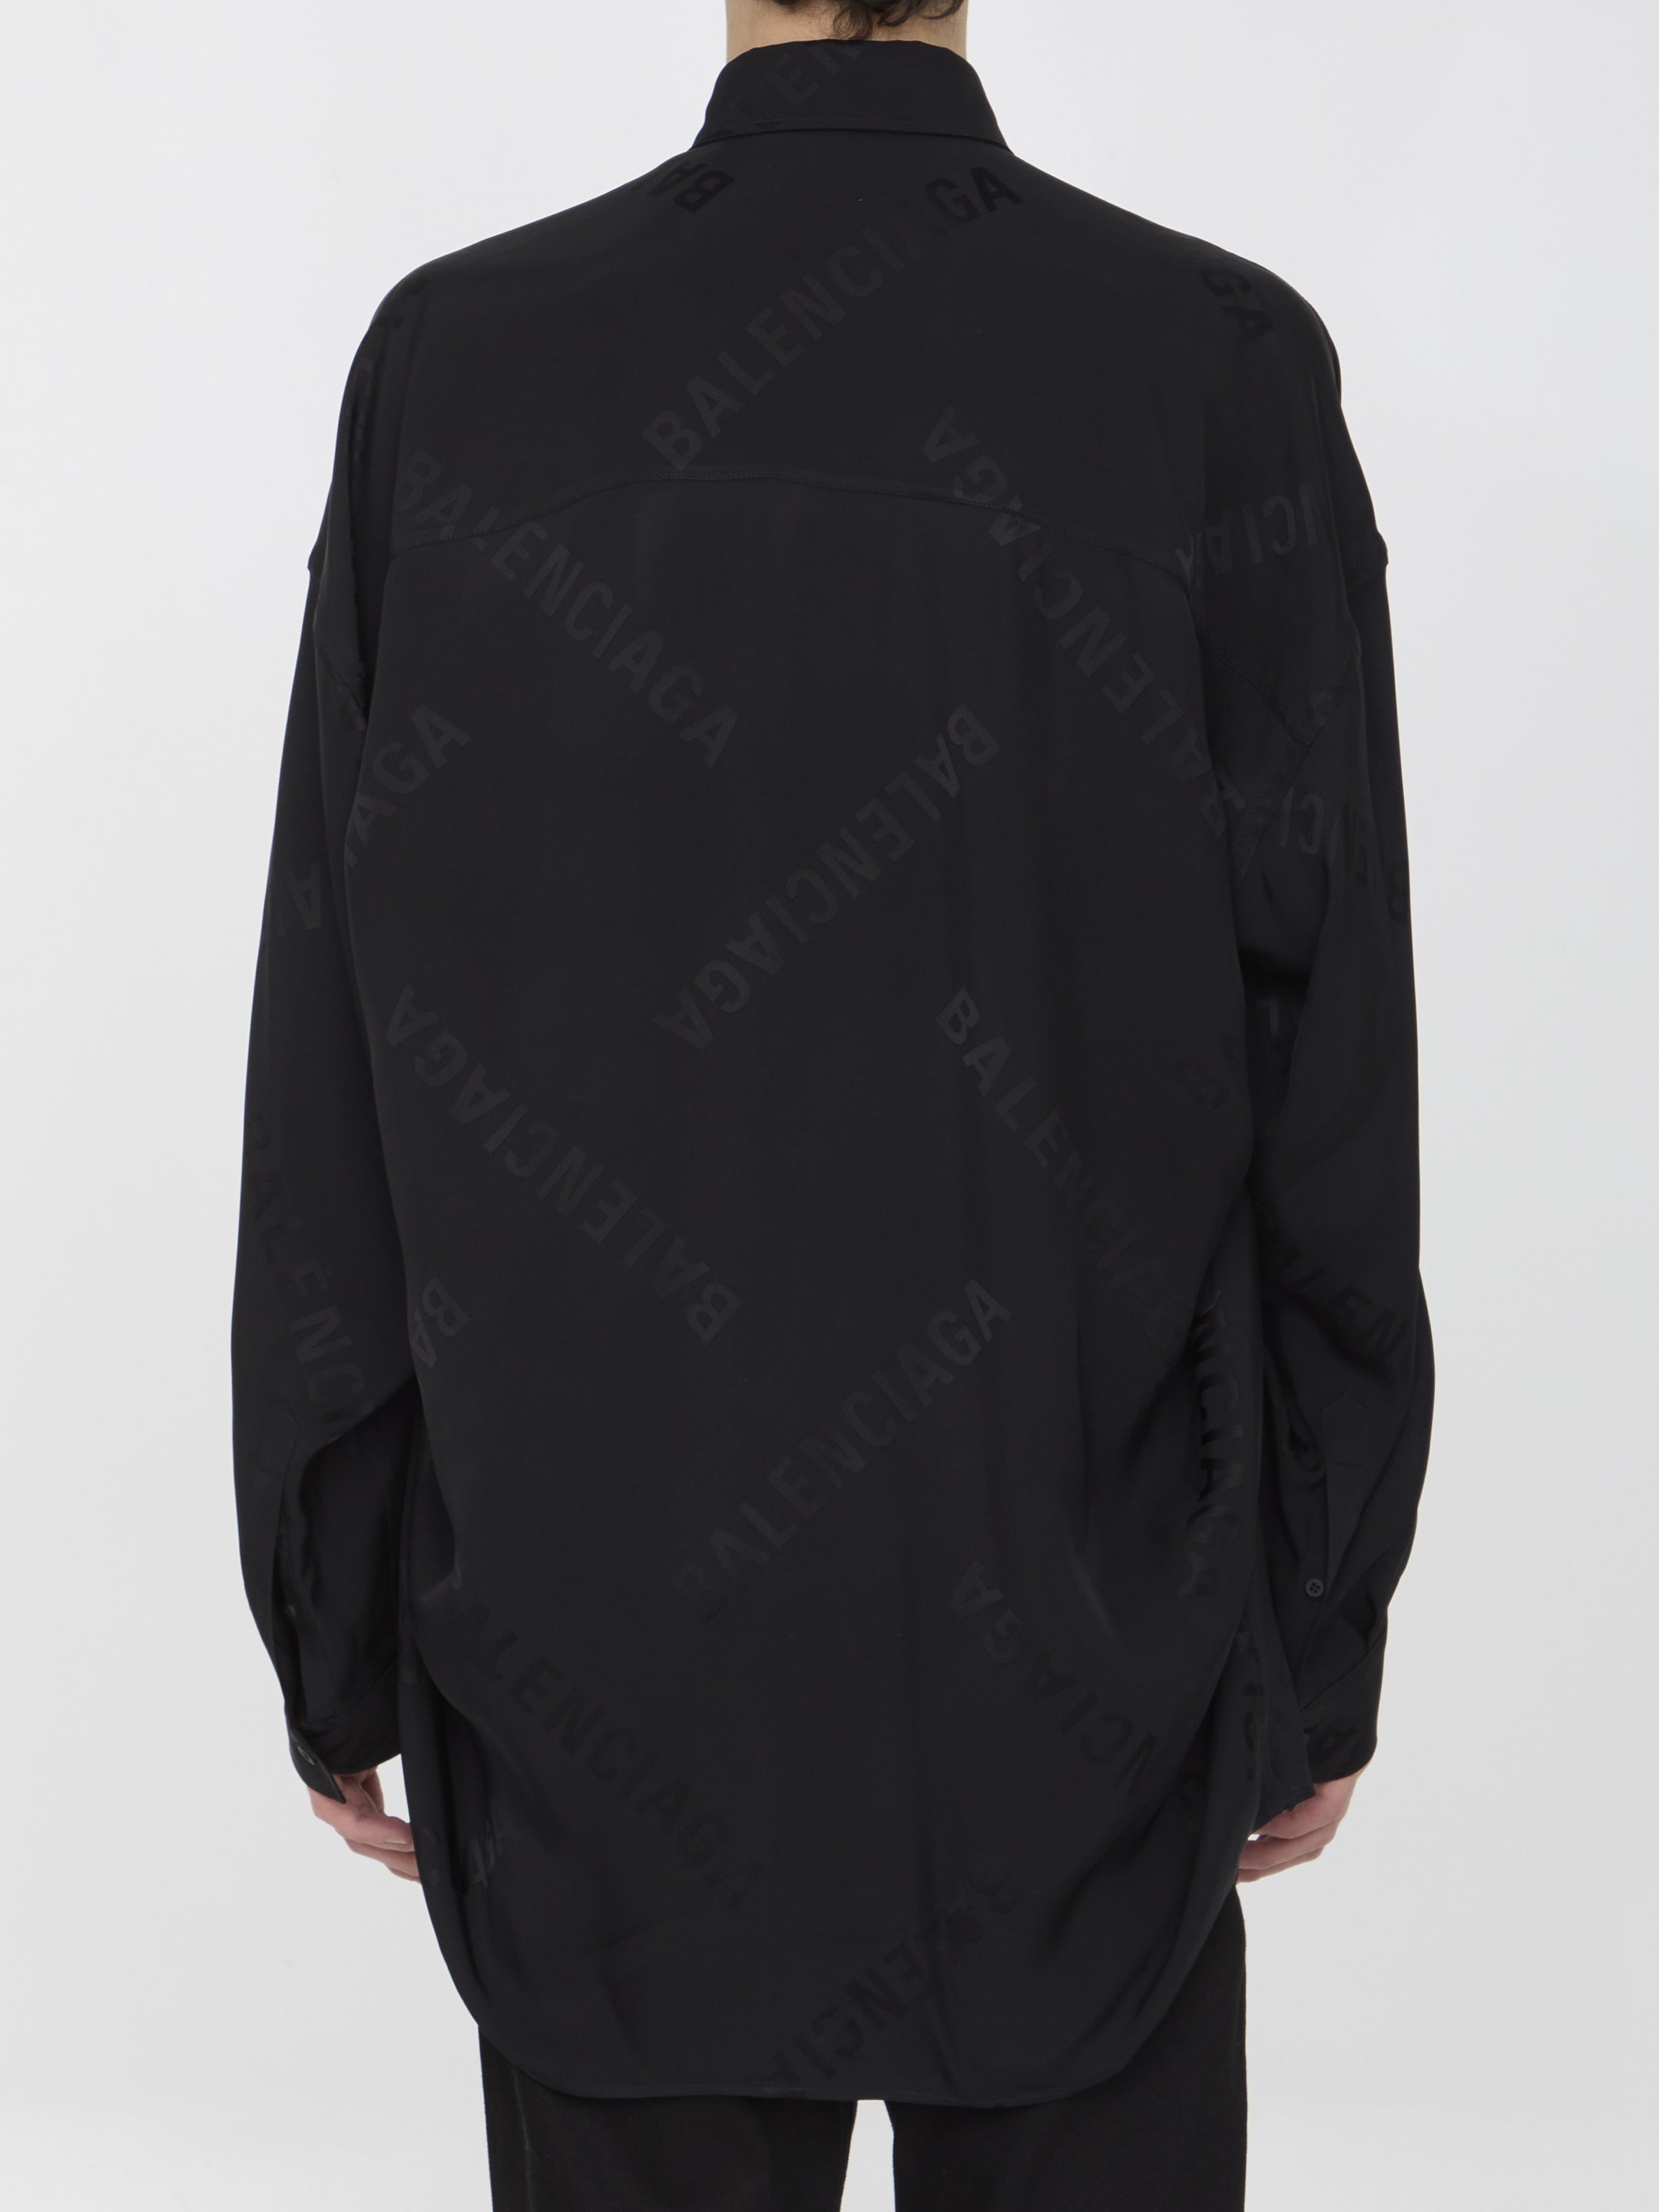 BALENCIAGA-OUTLET-SALE-Cocoon-shirt-Shirts-S-BLACK-ARCHIVE-COLLECTION-4.jpg